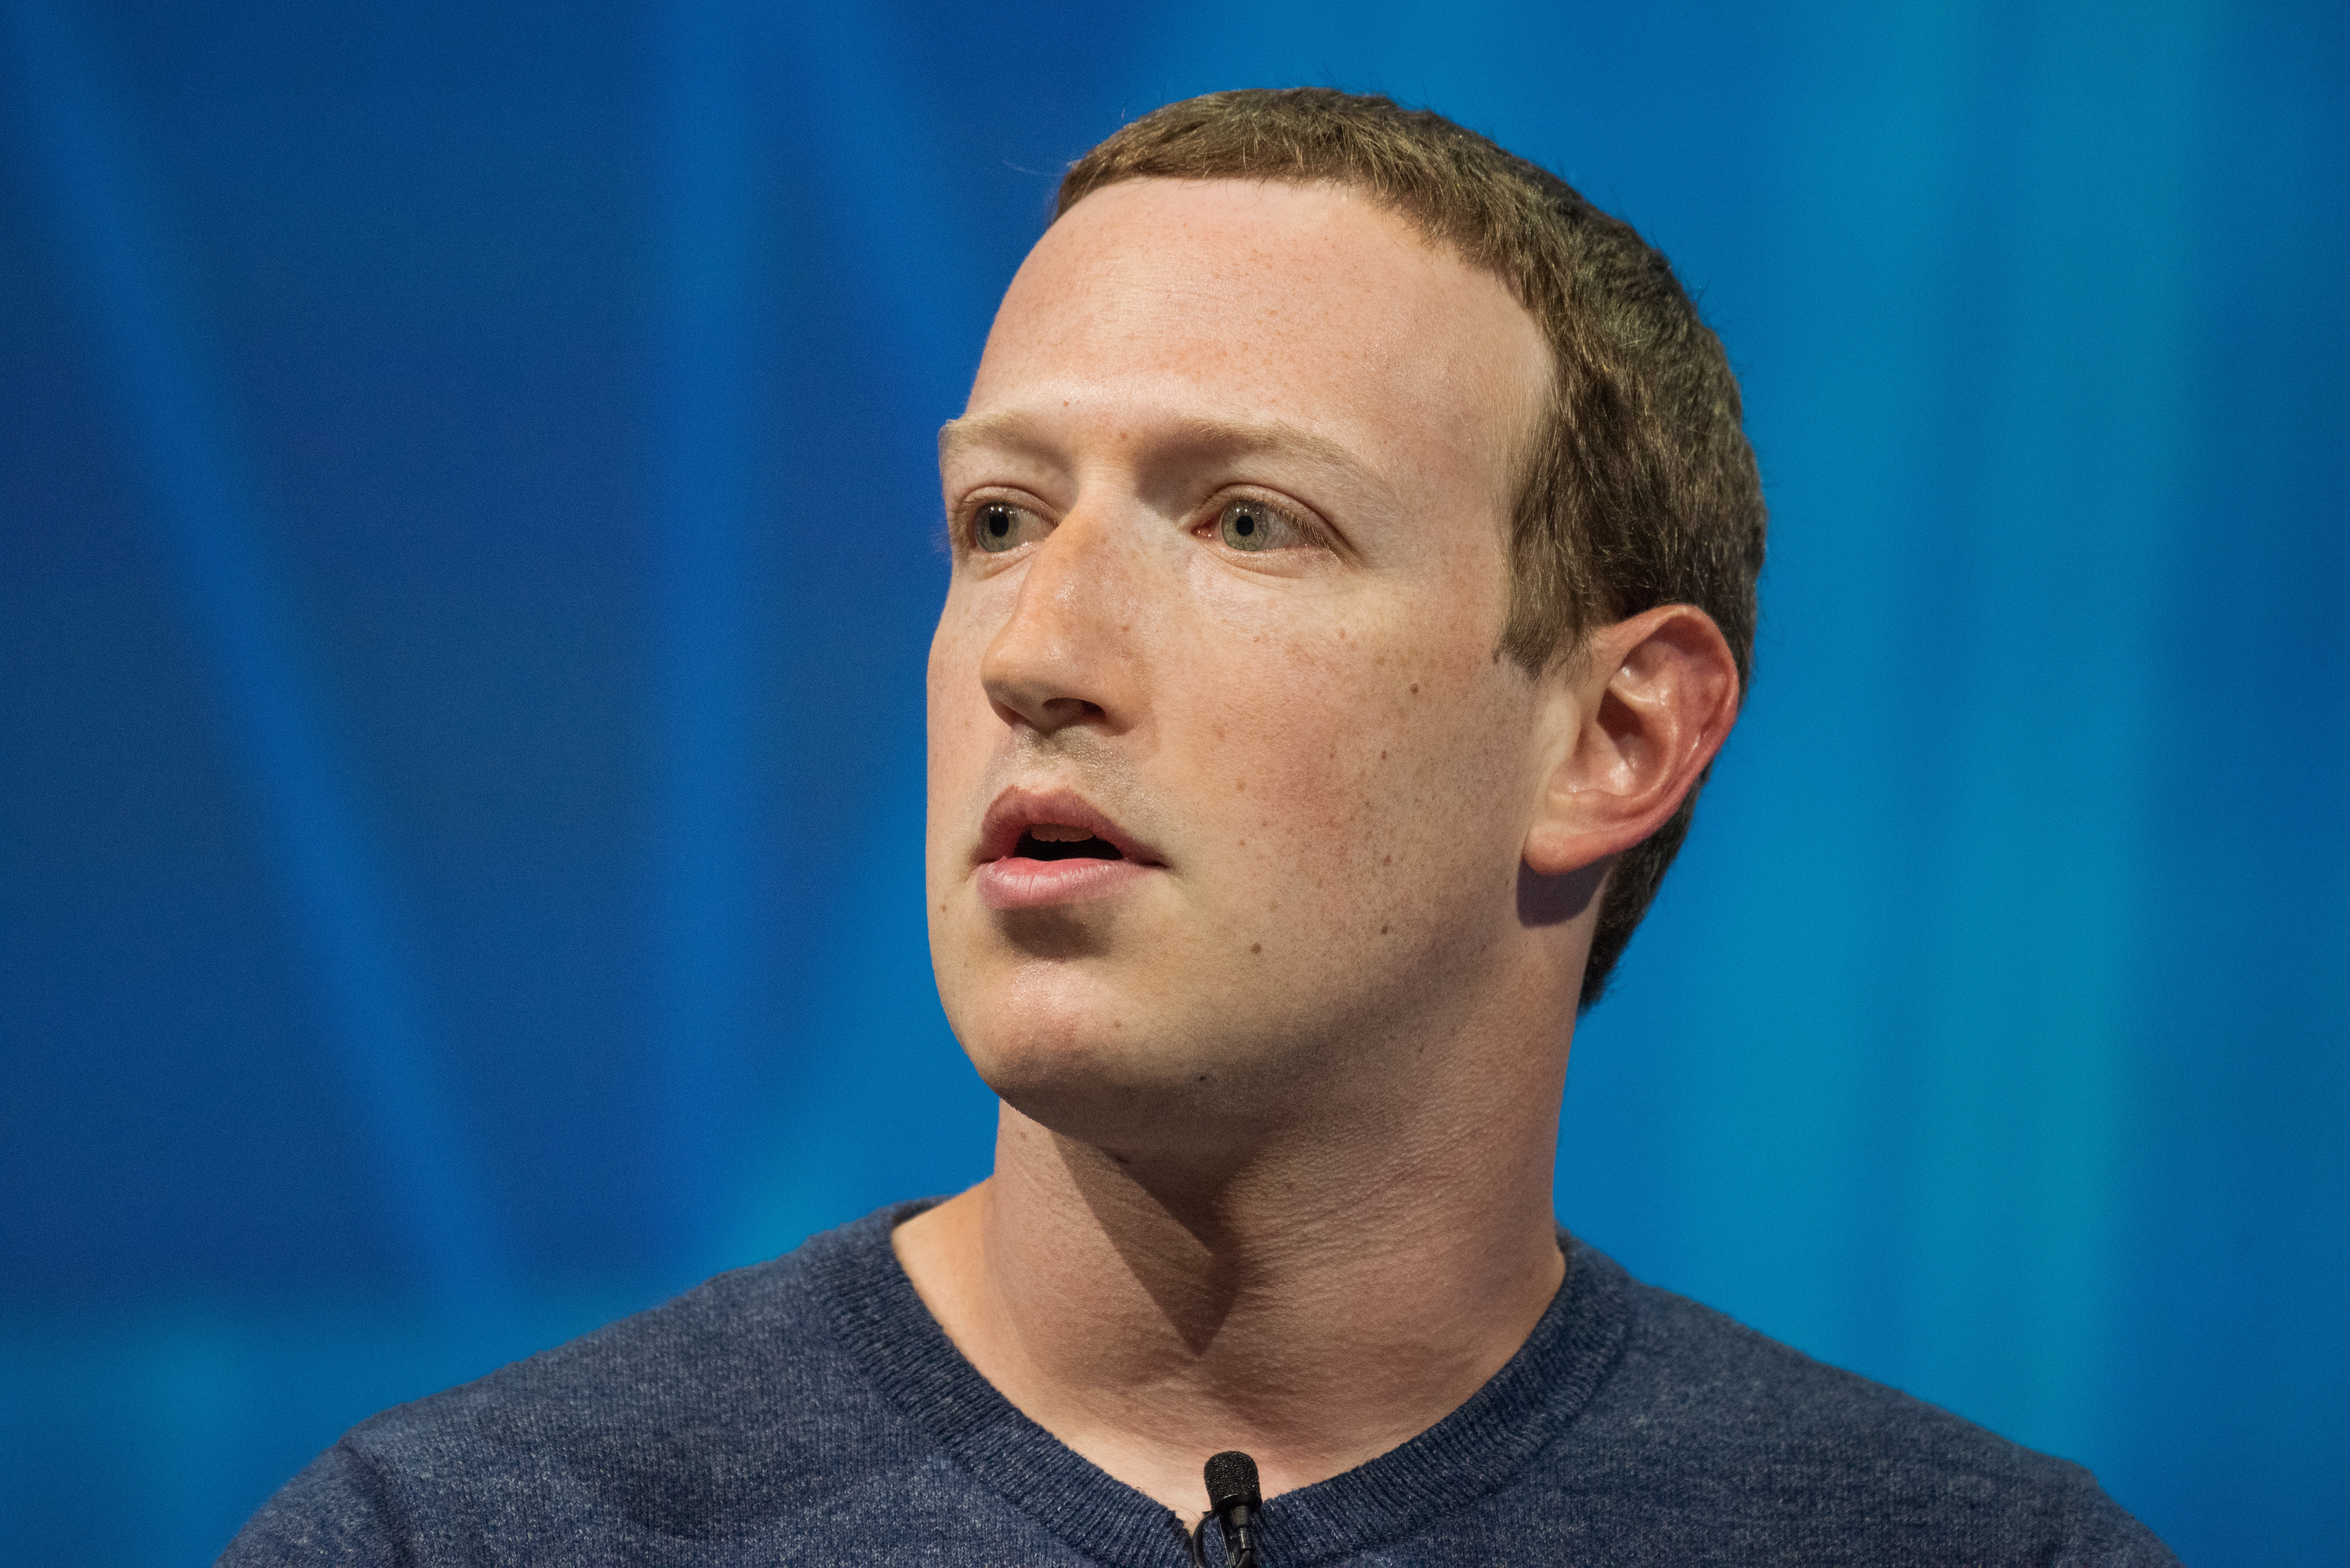 Mark Zuckerberg Says New Meta COO's Role Will Be 'Different' From What Sheryl Sandberg Did